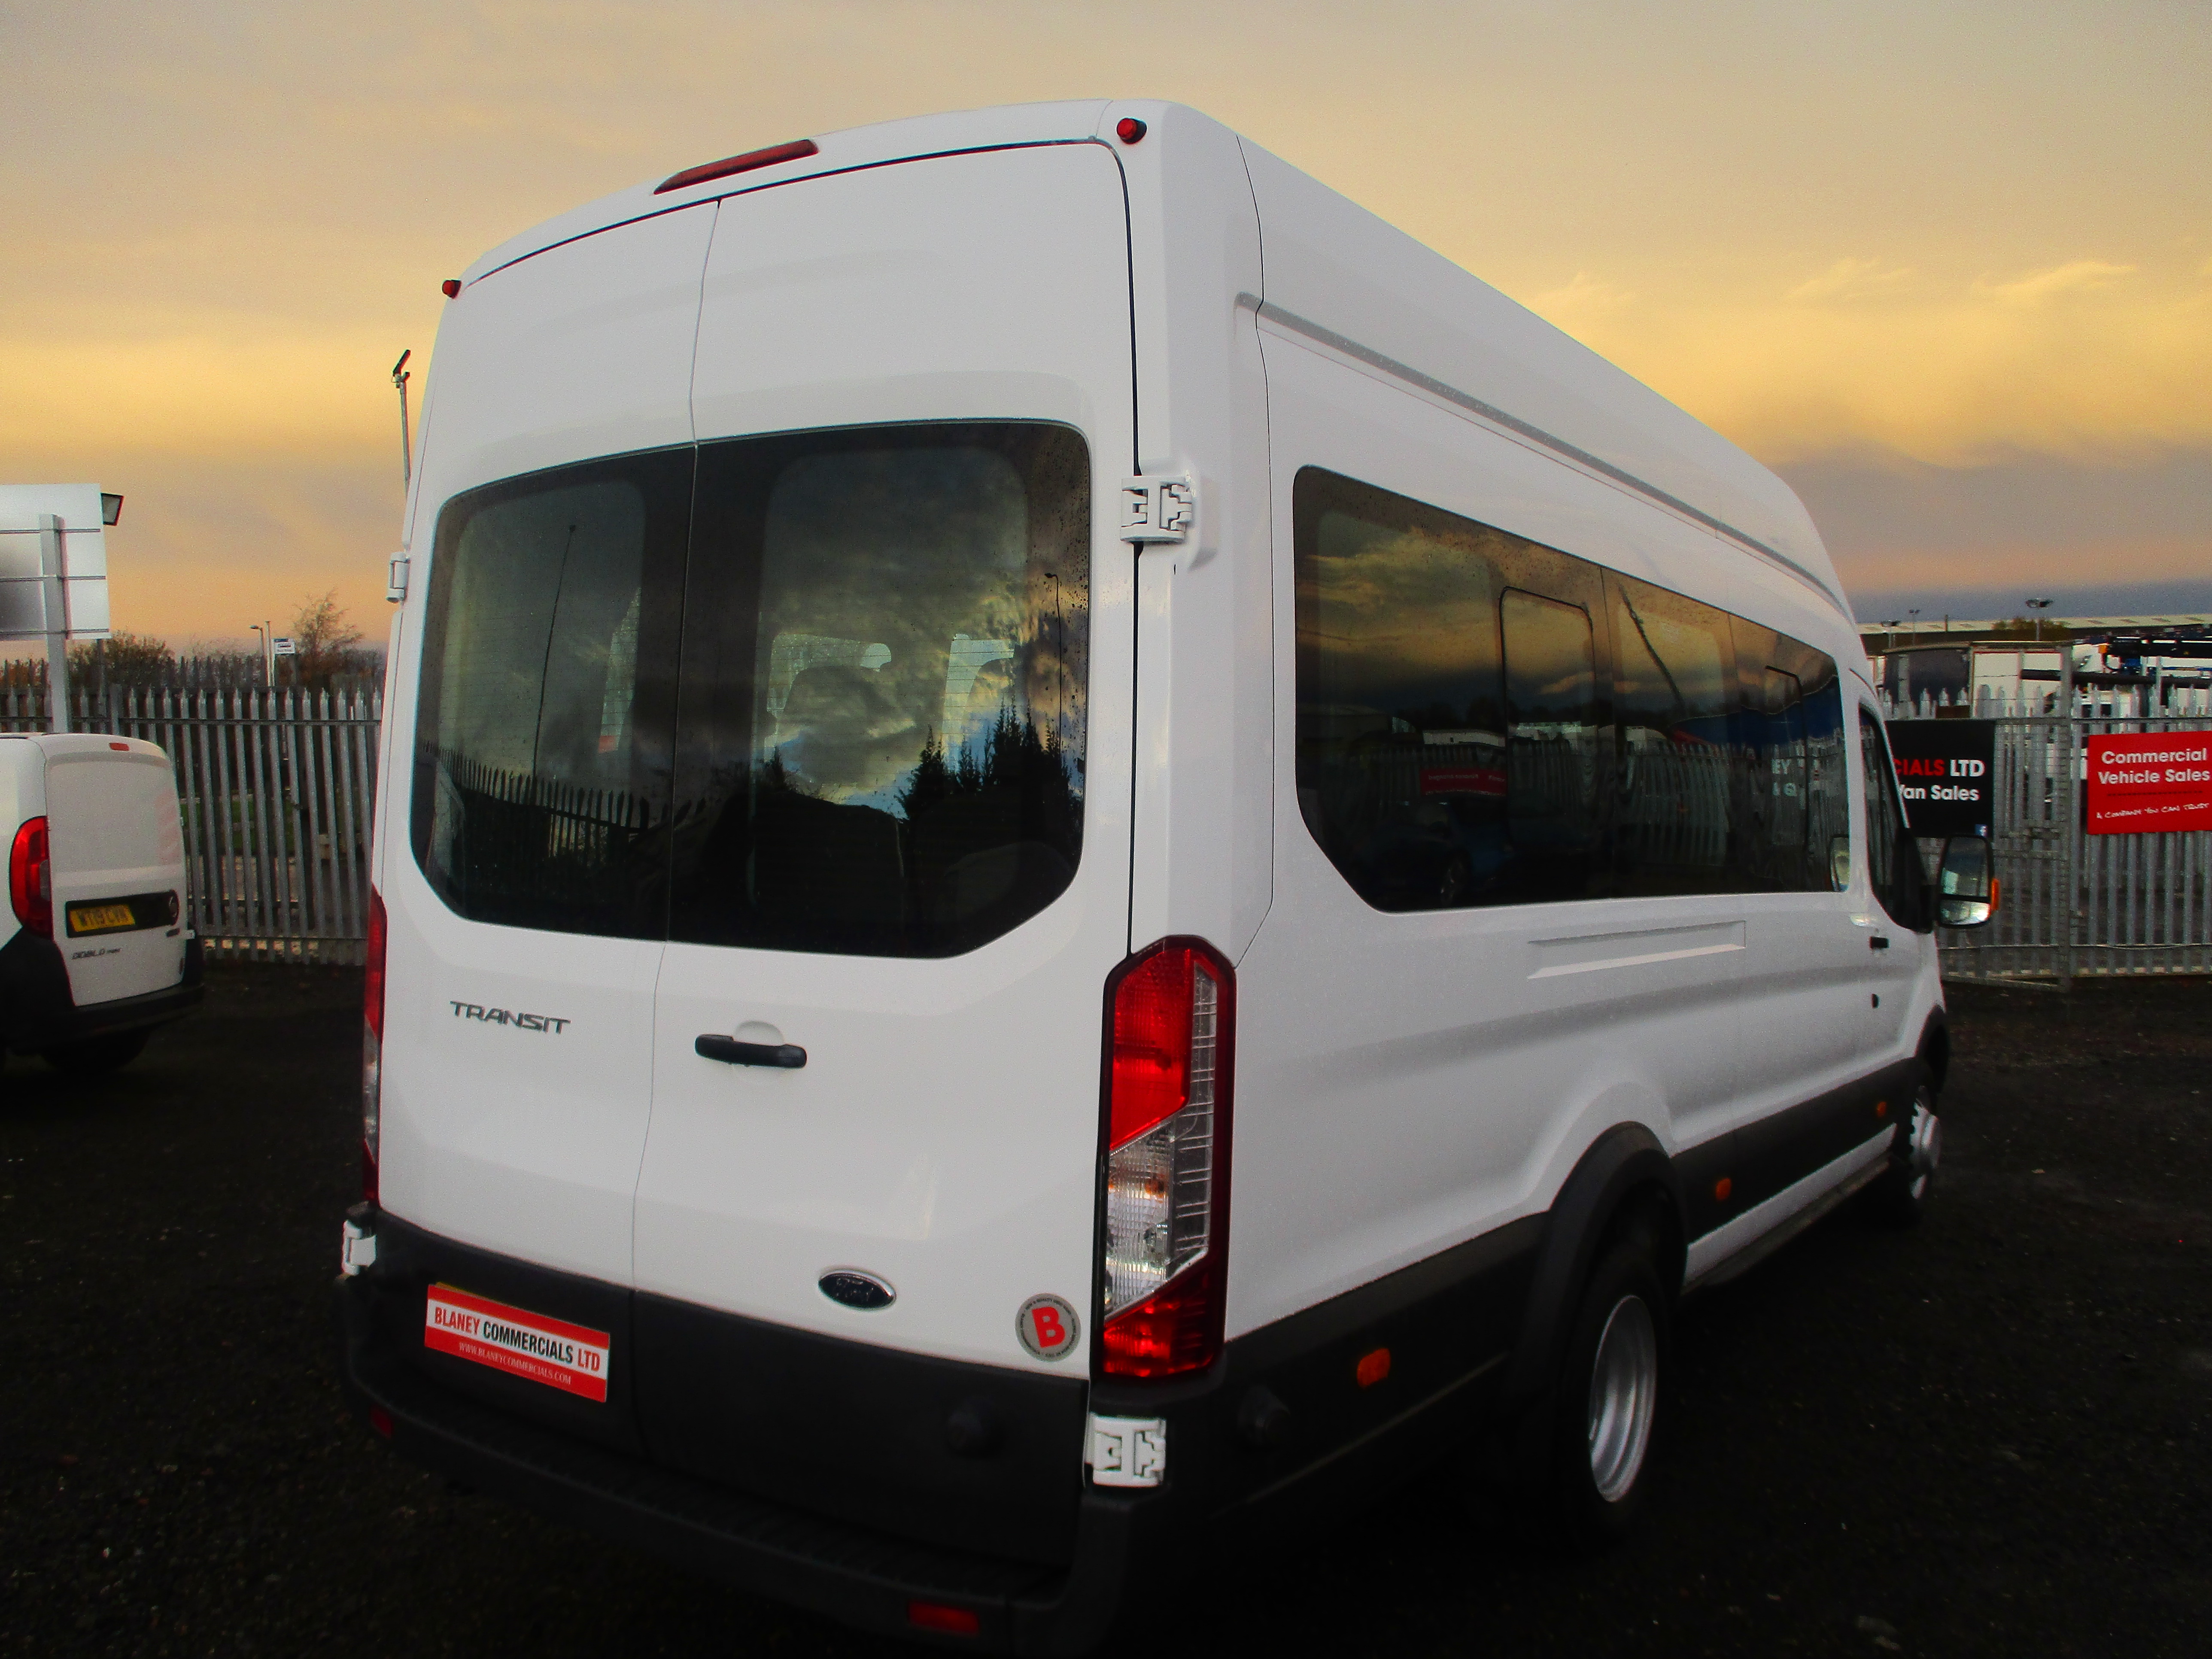 Ford Transit 460 L4 MINIBUS 2.2 TDCi 125PS 17 SEATER with AIR CON ( EX M.O.D ) IMMACULATE!!